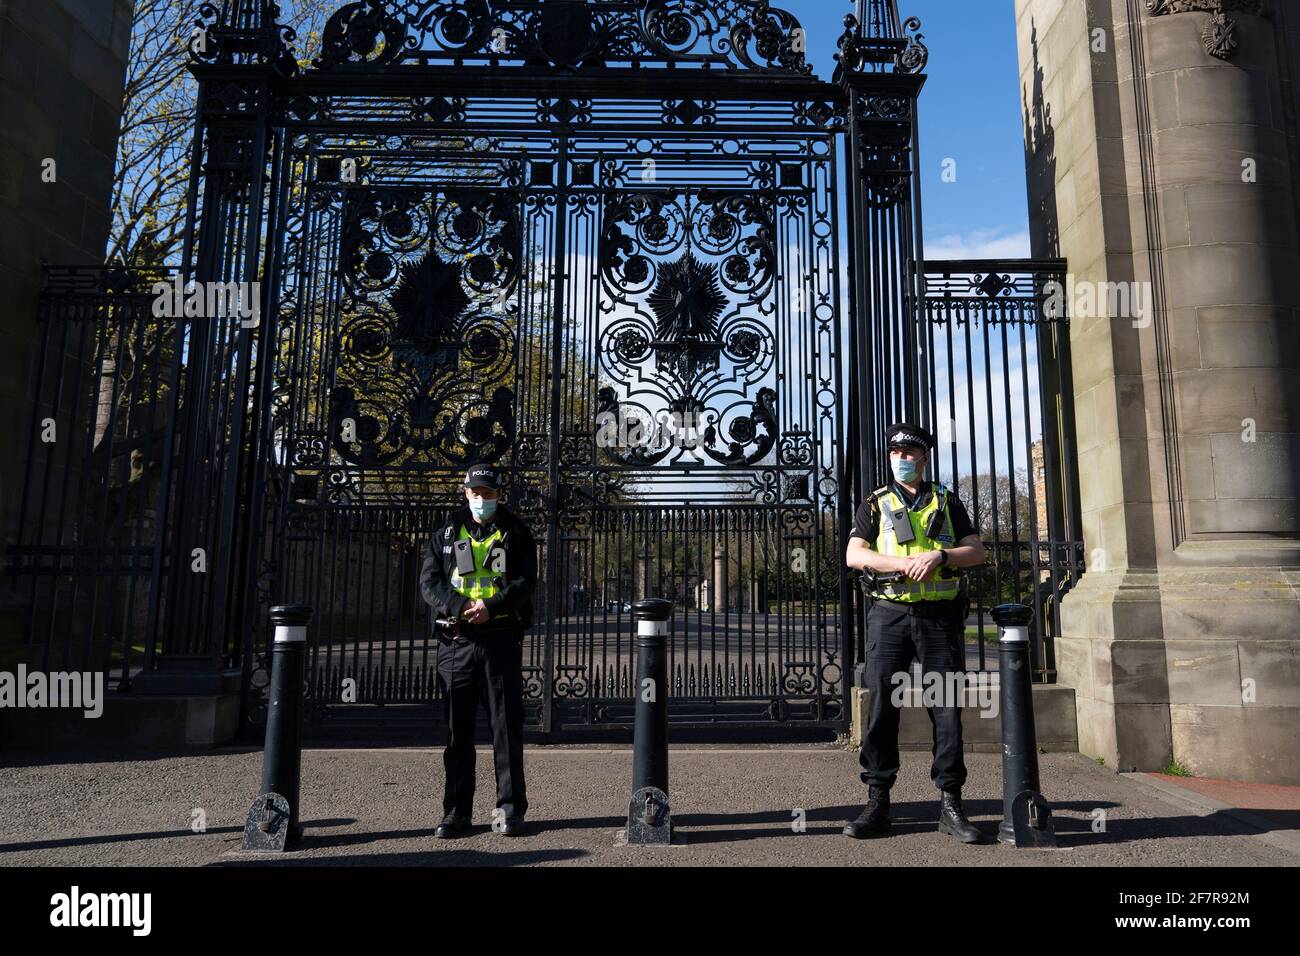 Edinburgh, Scotland, UK. 9 April 2021. Flags fly at half mast in Edinburgh today at the news of the death of Prince Philip the Duke of Edinburgh. Pic; Police stand outside gates to Palace of Holyroodhouse.   Iain Masterton/Alamy Live News Stock Photo